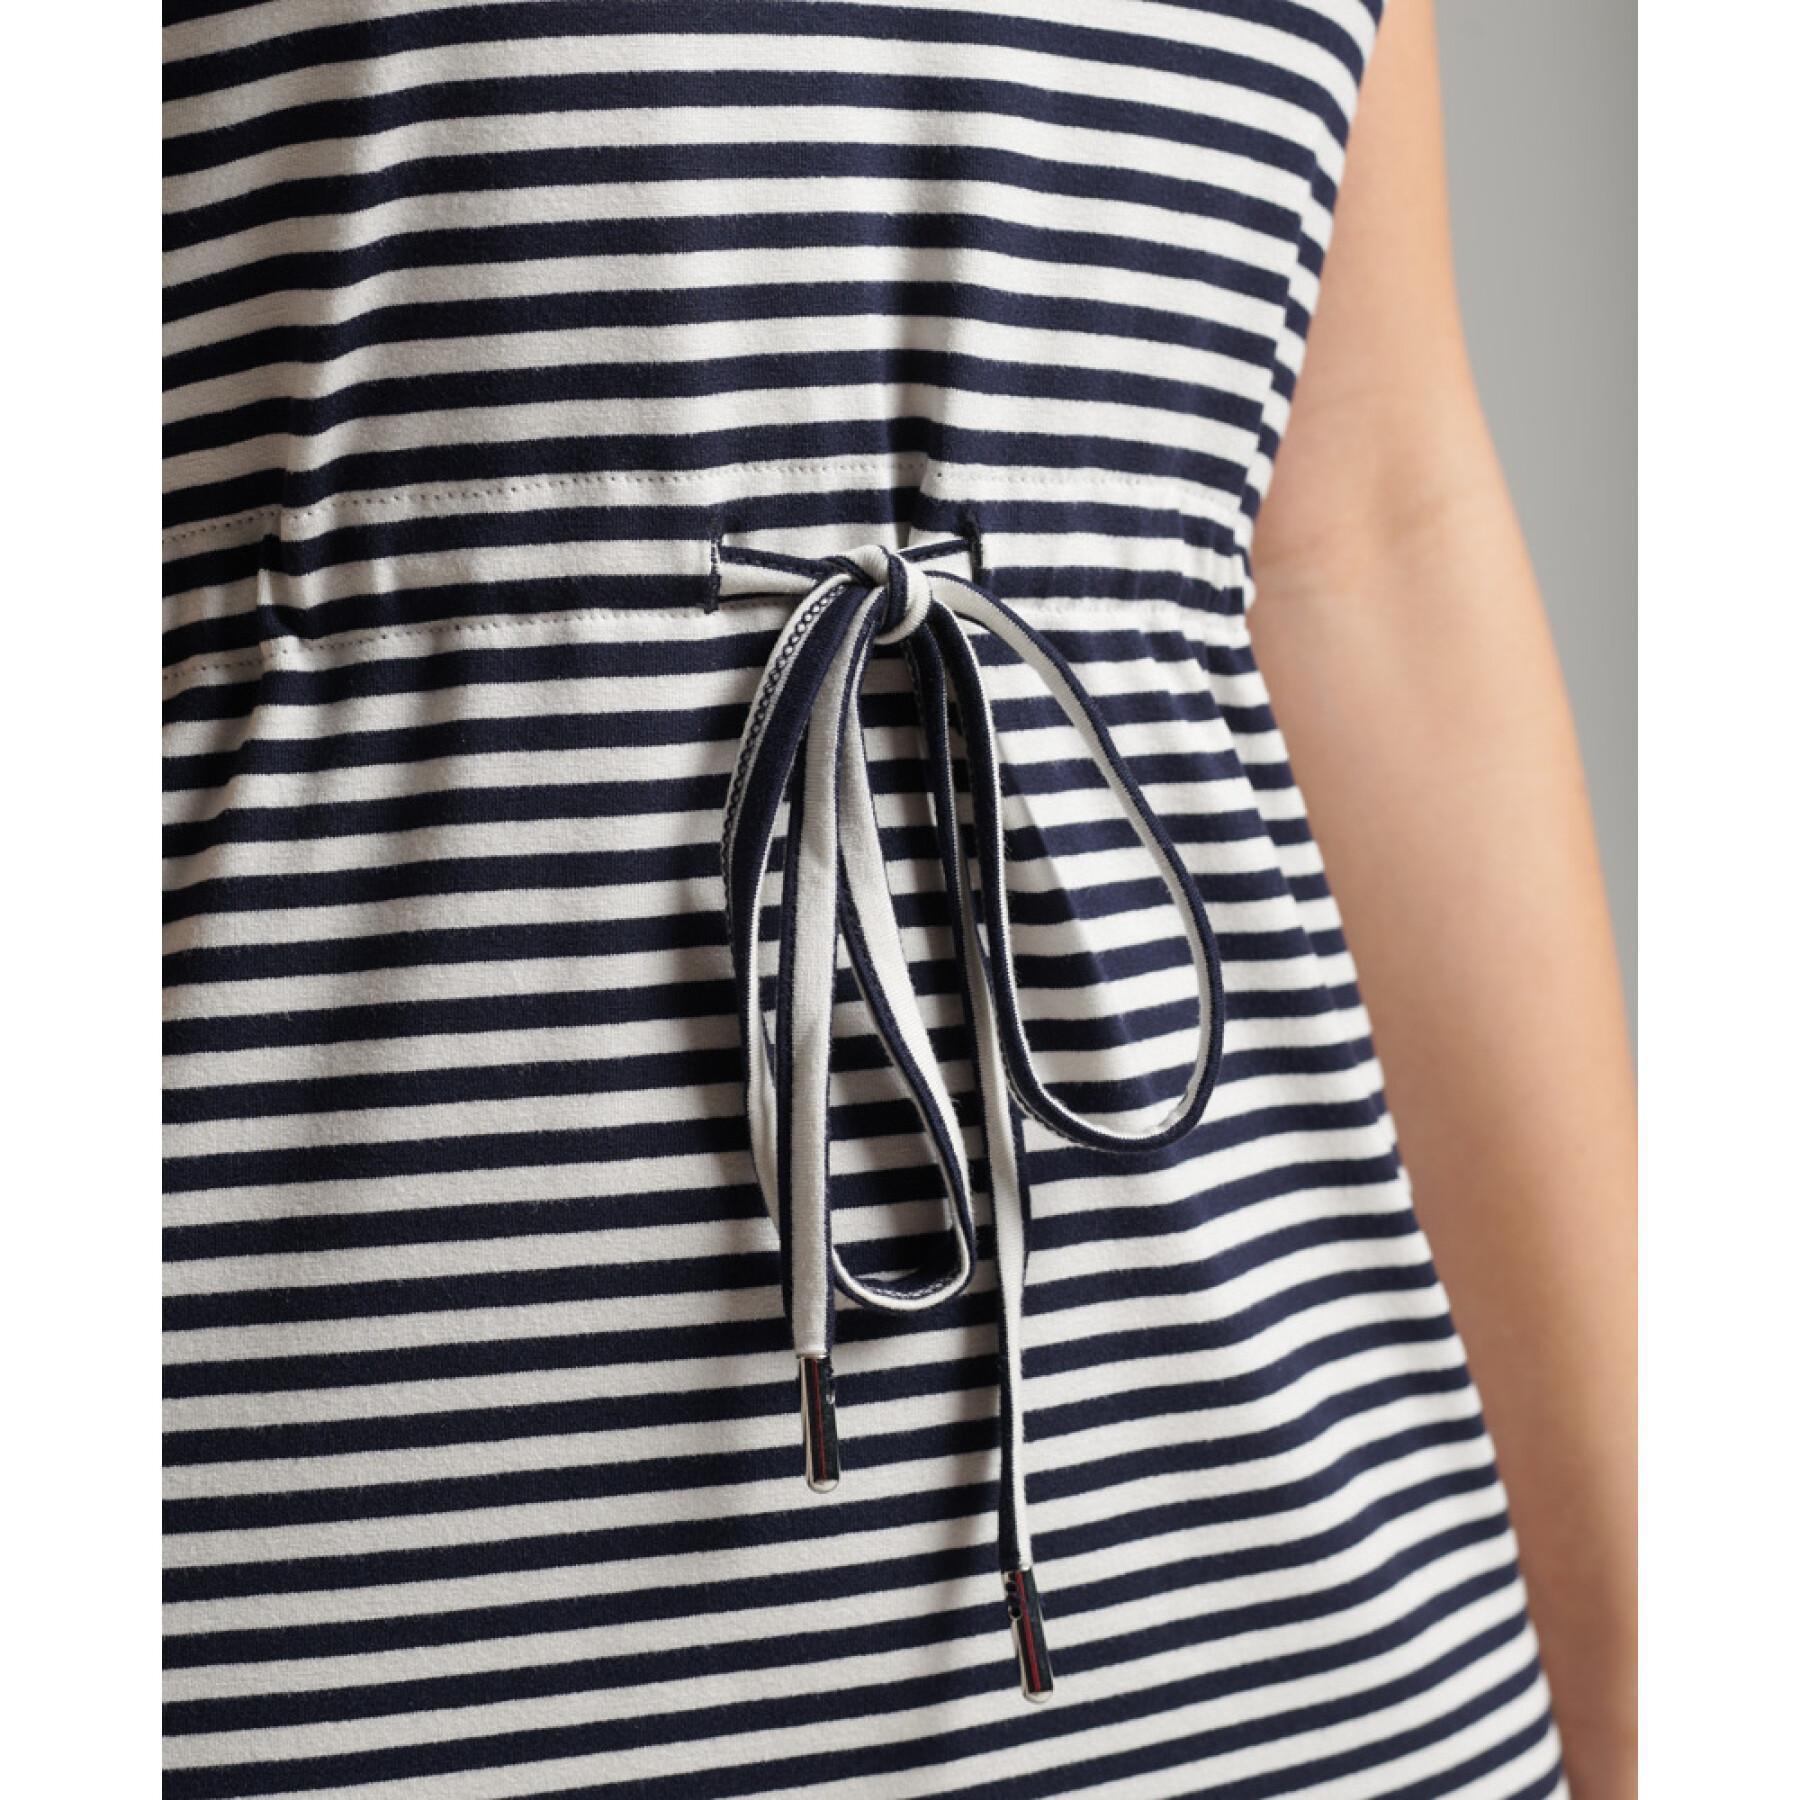 T-shirt dress with drawstring for women Superdry Ecovero